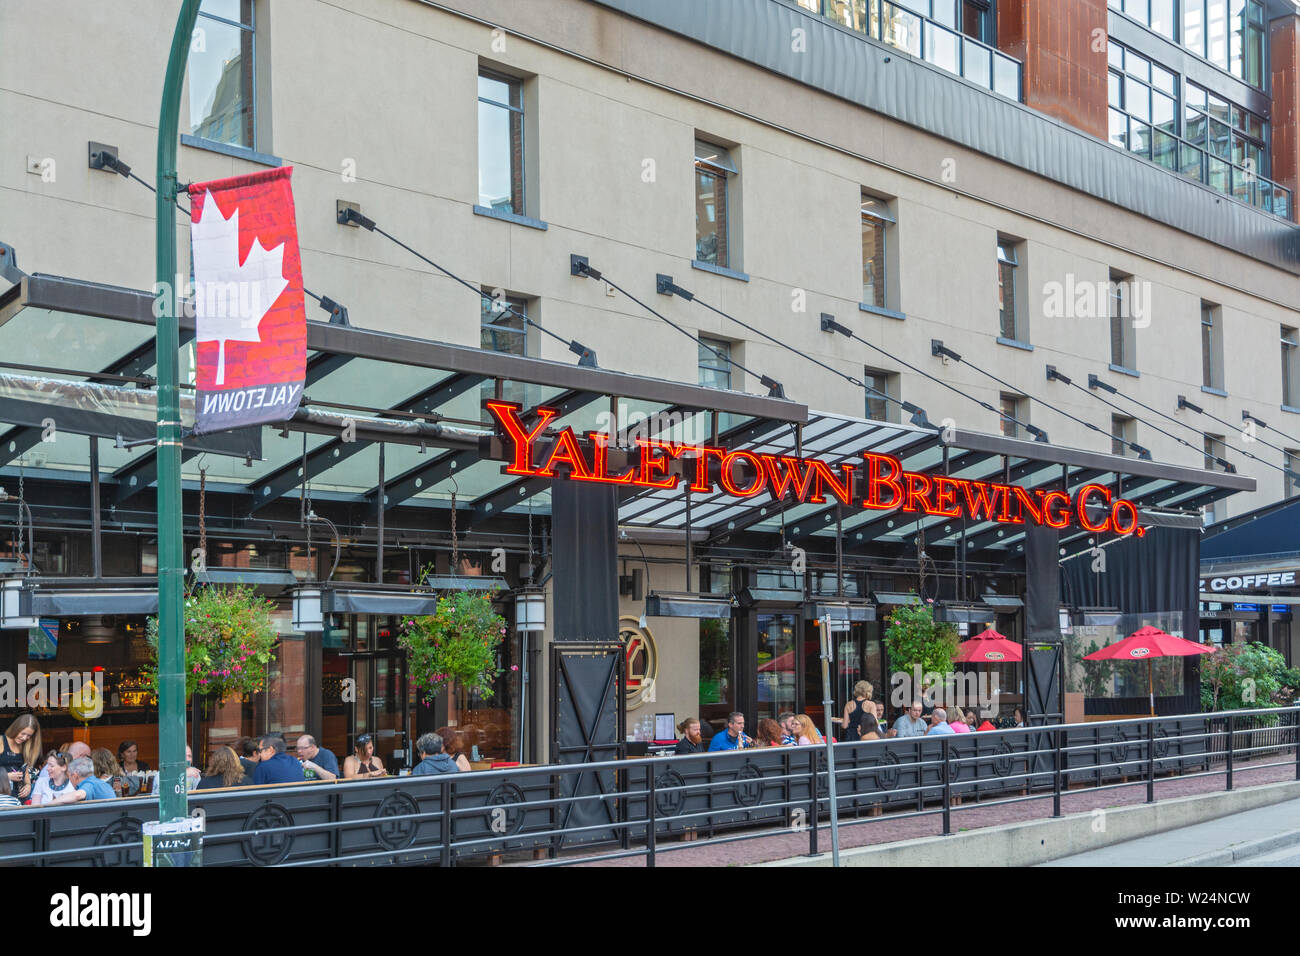 Canada, British Columbia, Vancouver, Yaletown Brewing Co., , bar, restaurant Stock Photo